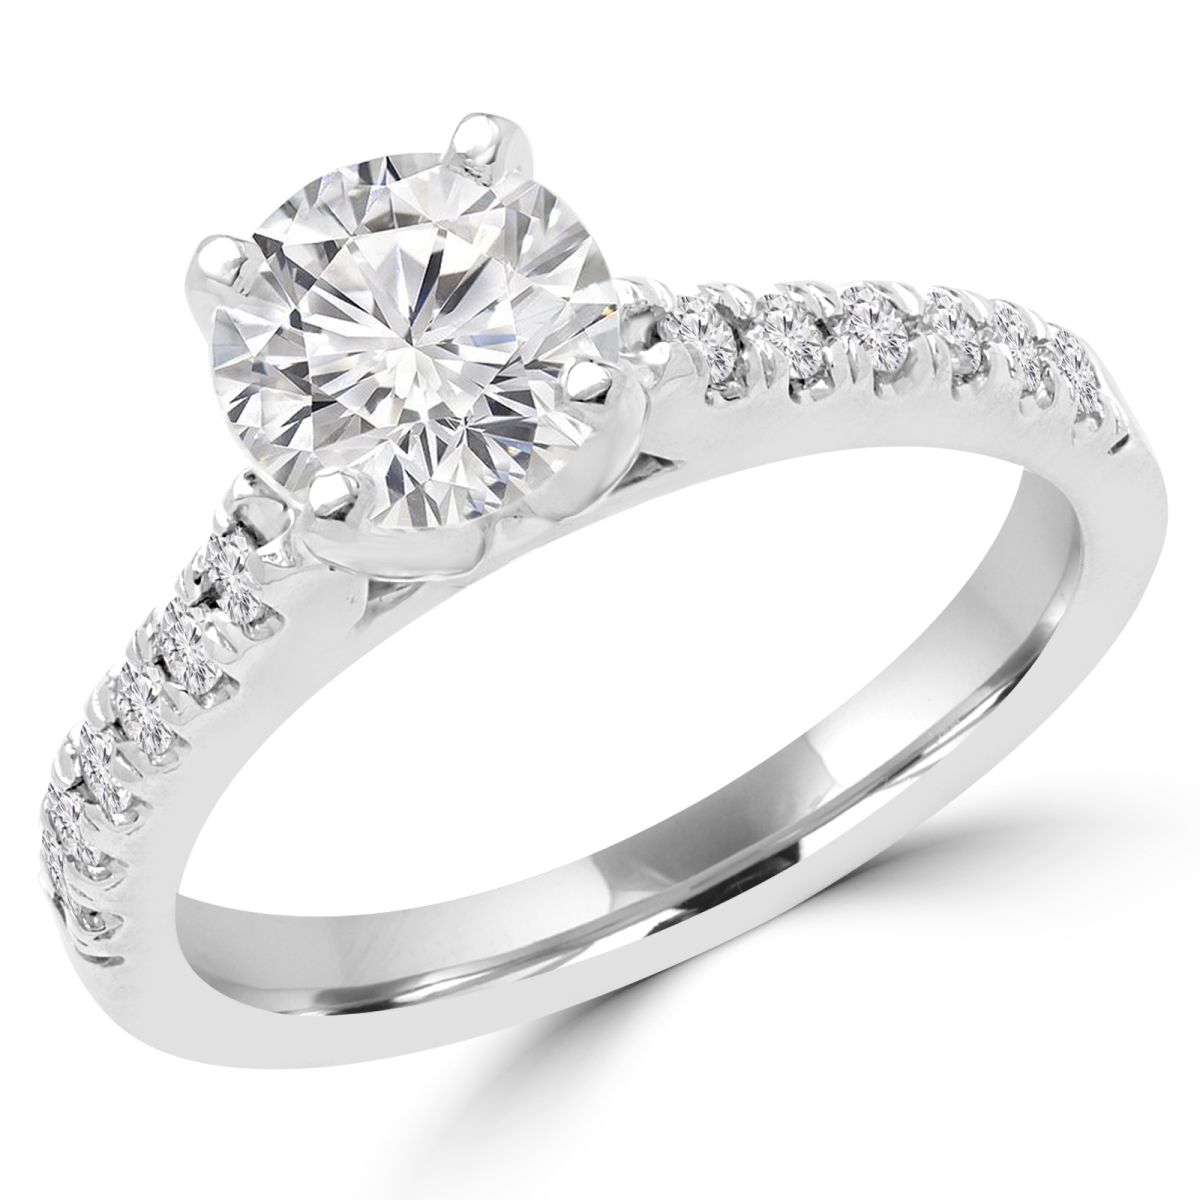 0.8 CTW Multi-Stone Round Diamond Engagement Ring in 14K White Gold - Size 3 -  Great Gems, GR3054384